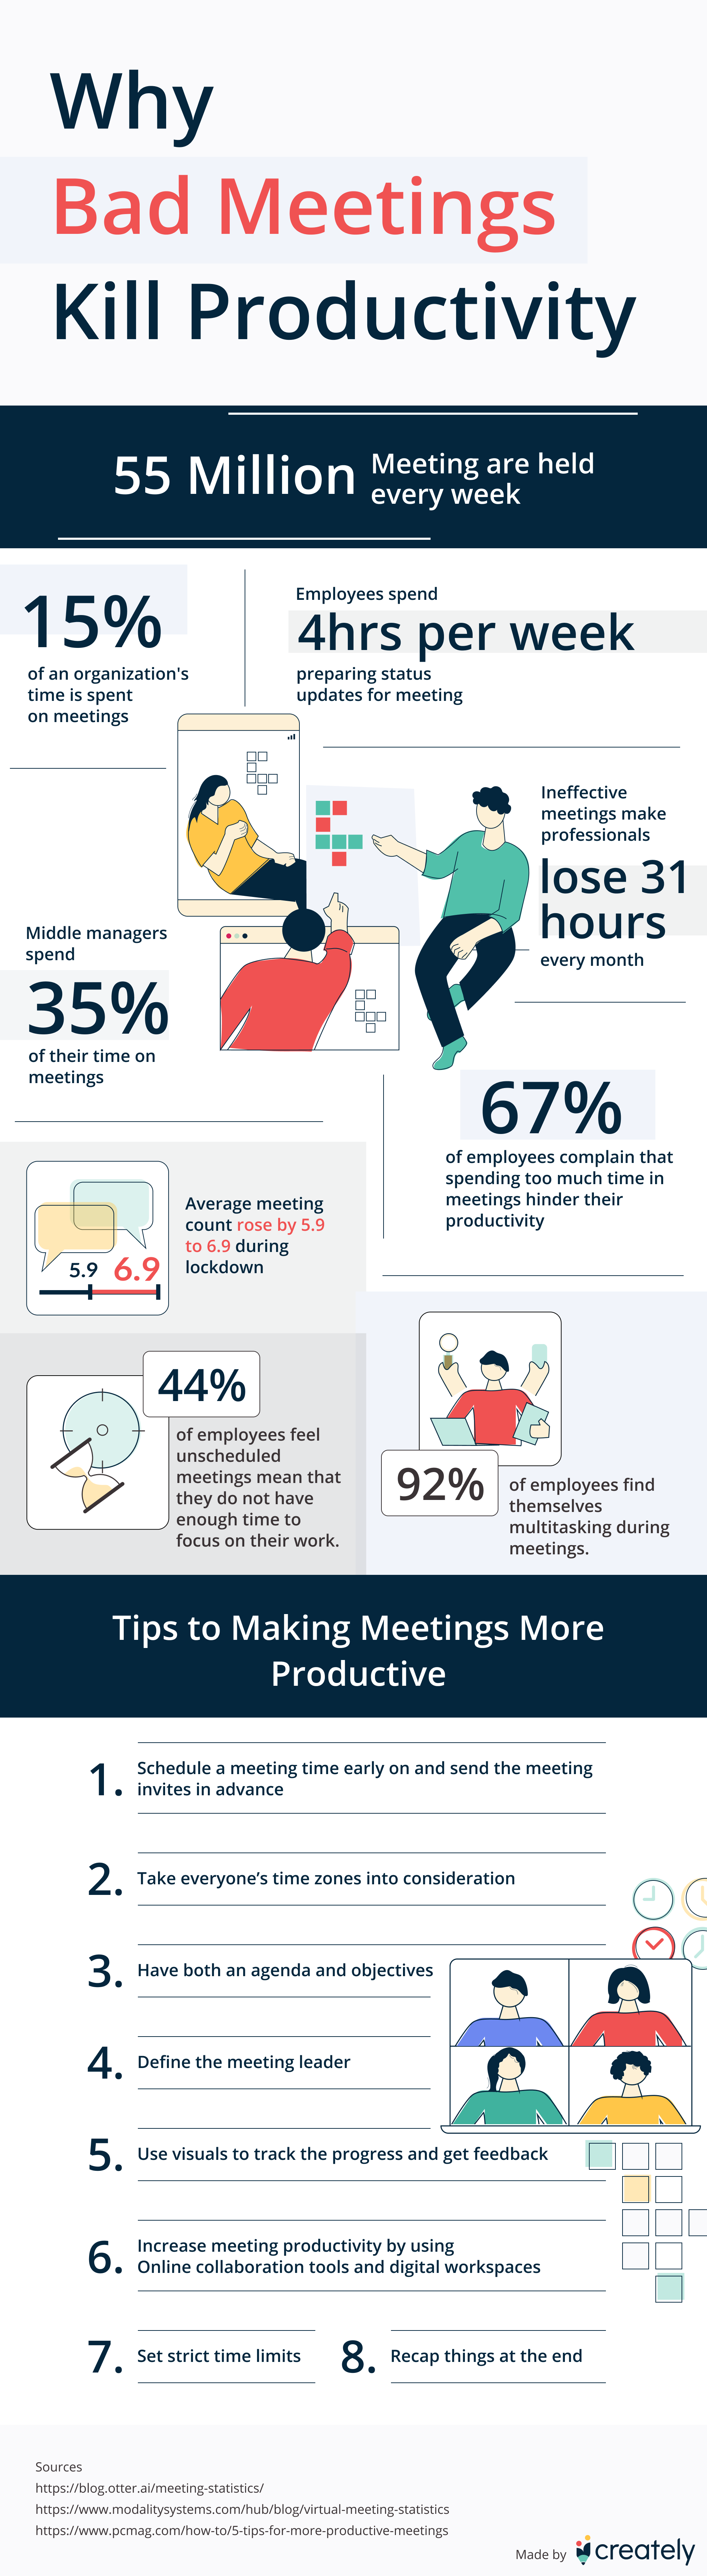 Want to Save a Day a Week at Work? Start by Killing Bad Meetings